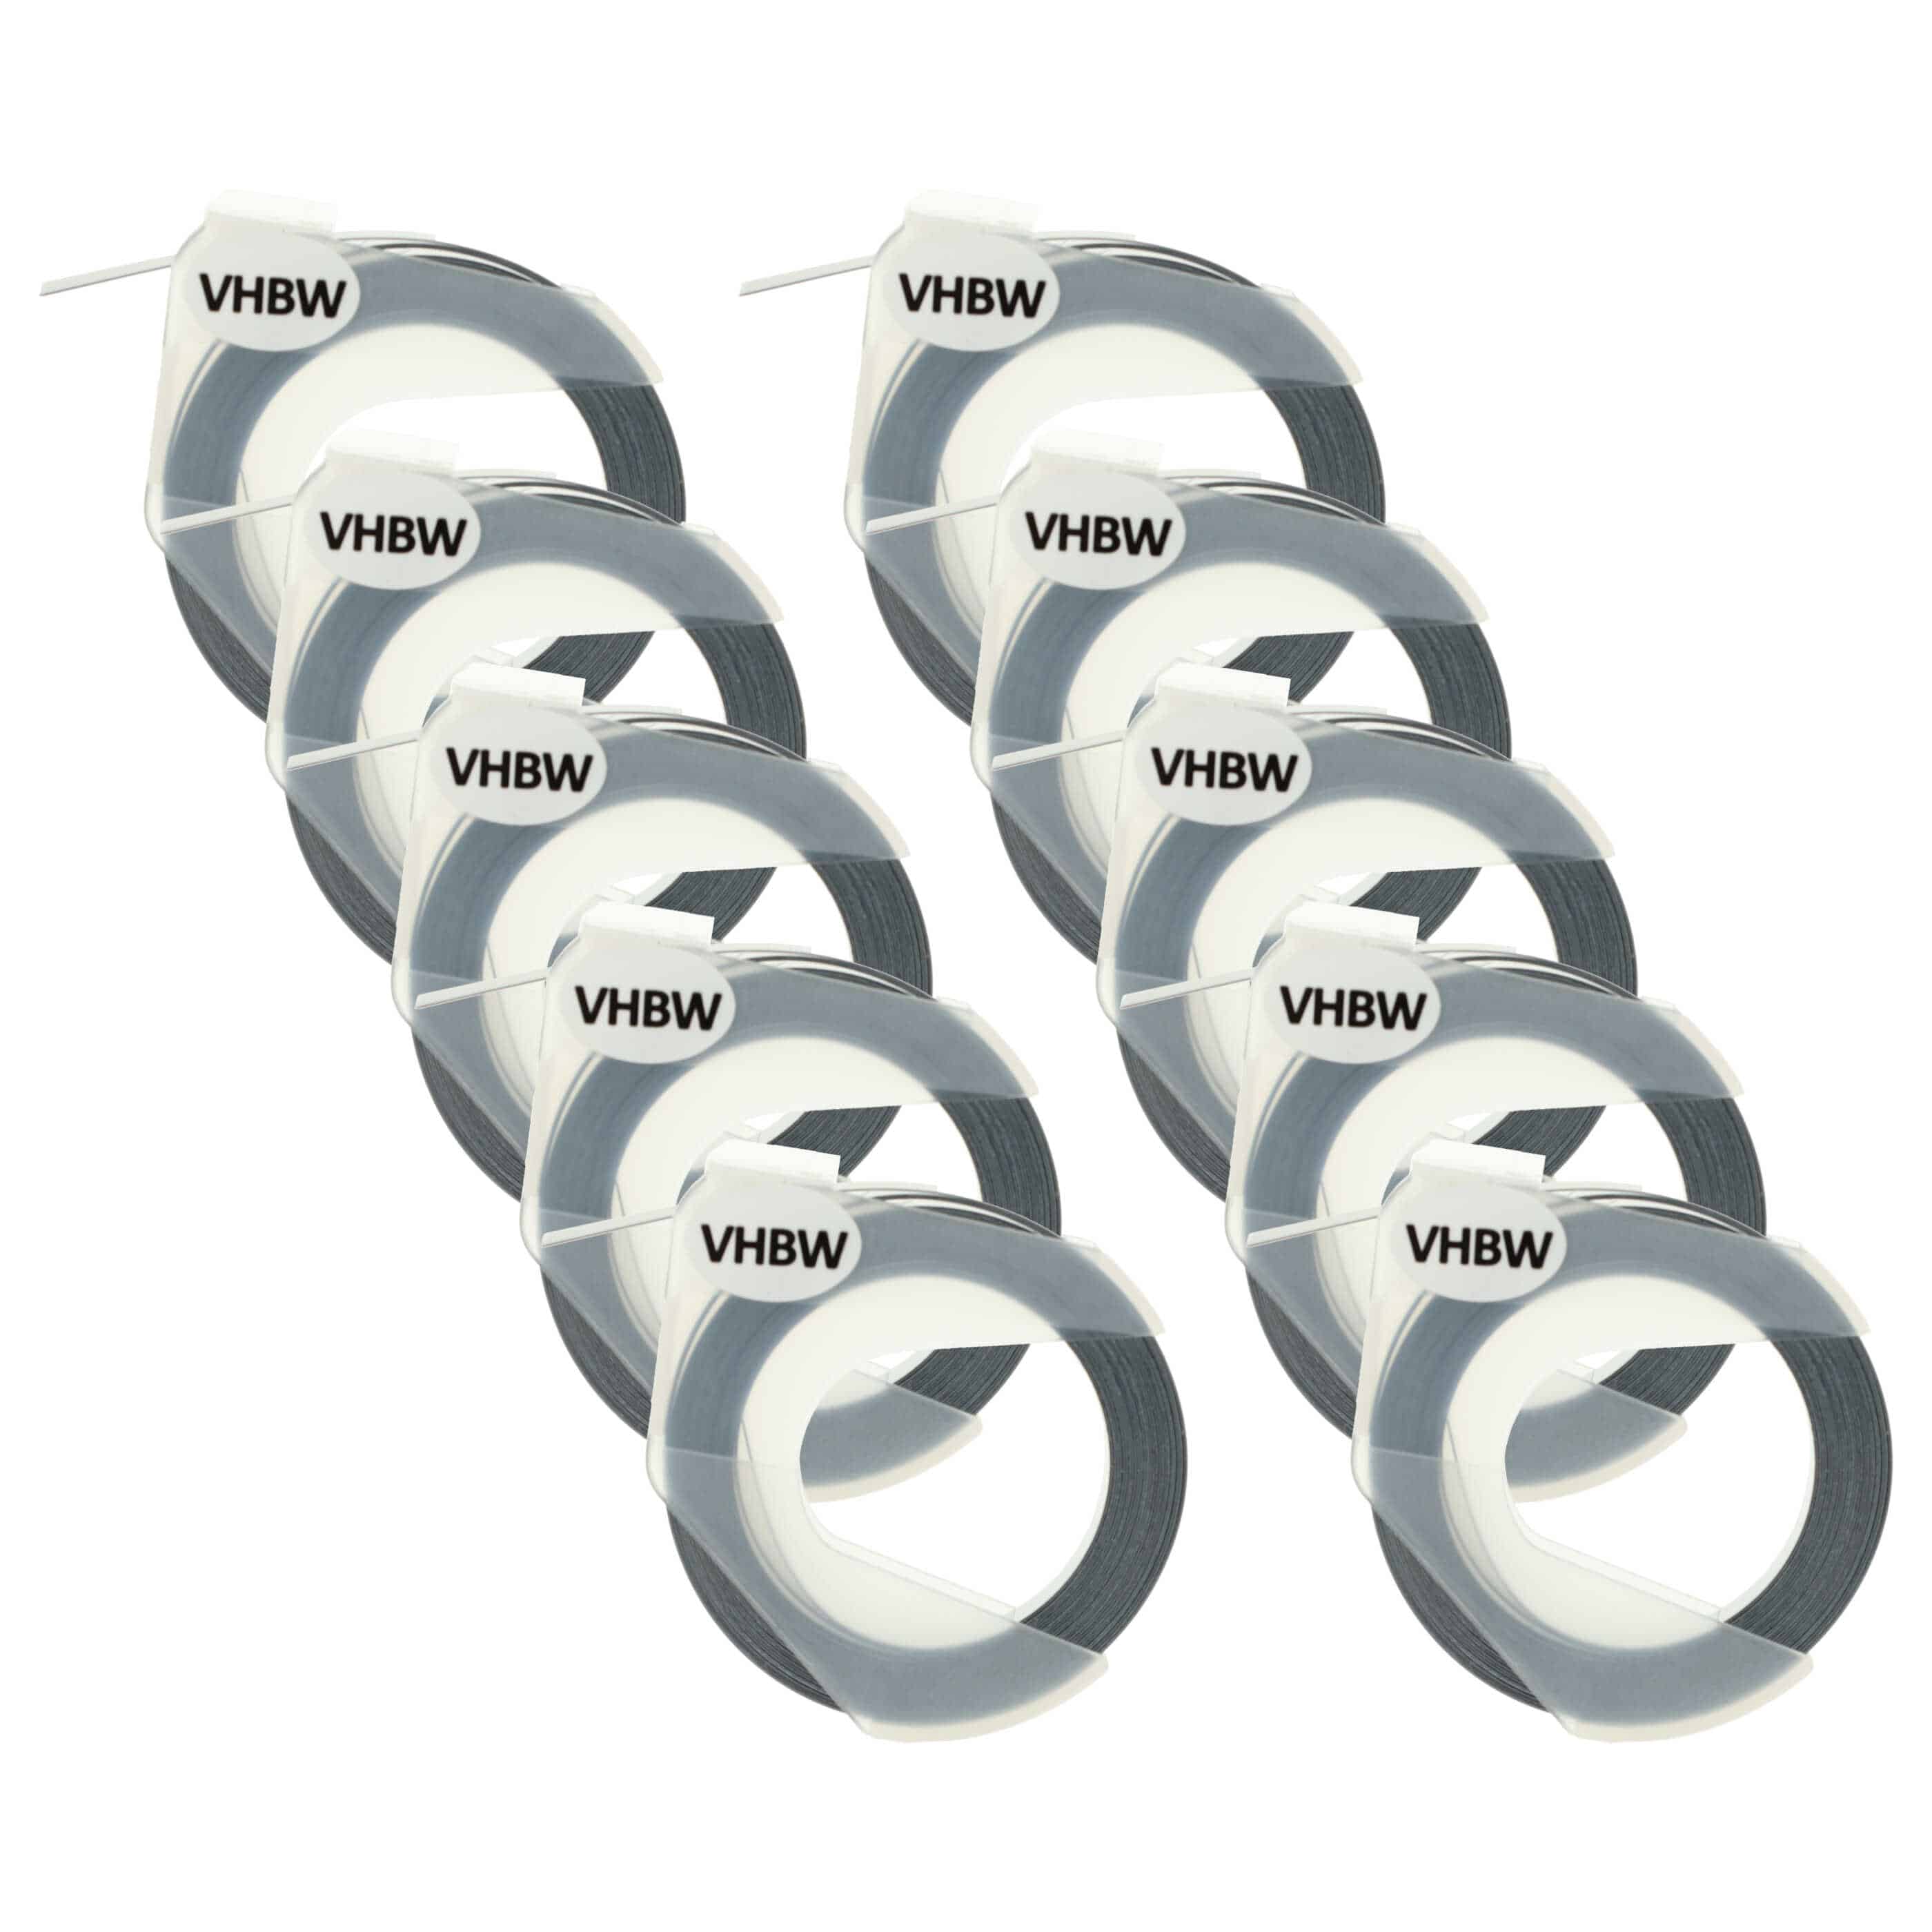 10x 3D Embossing Label Tape as Replacement for Dymo 520109, 0898130, S0898130 - 9 mm White to Black